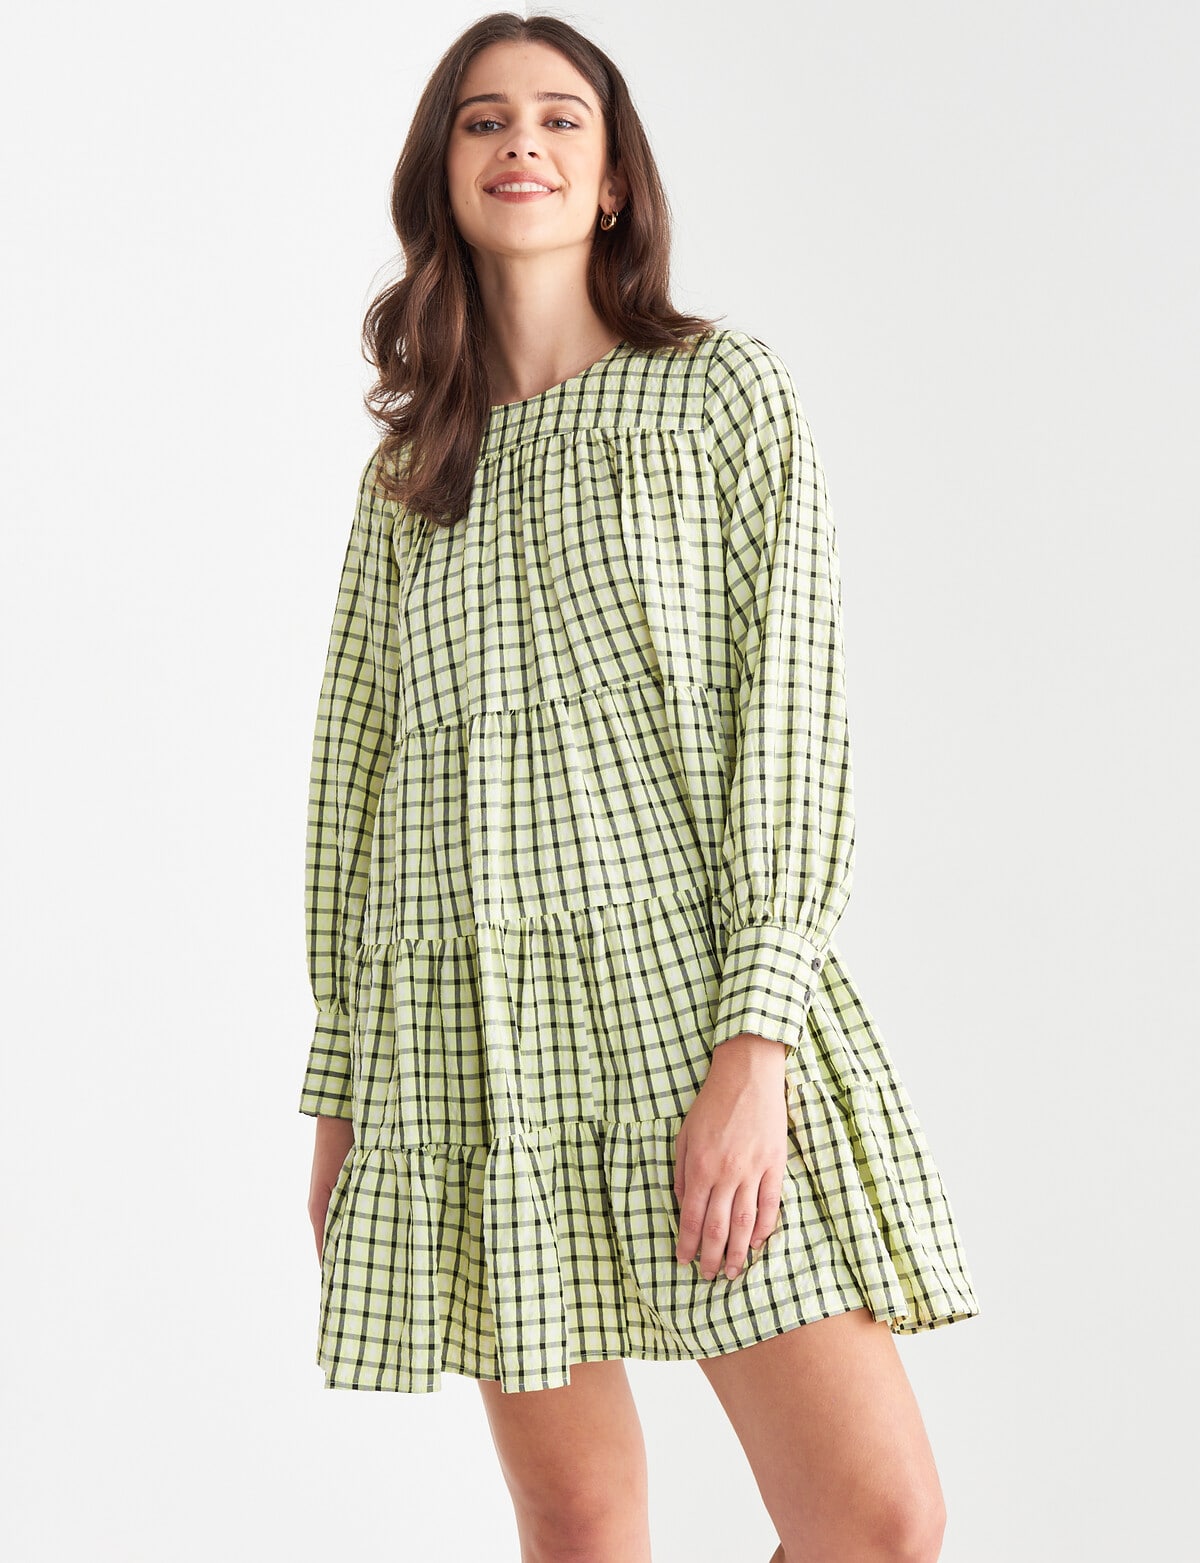 Mineral Maisie Dress, Bitter Check - Womens Clearance